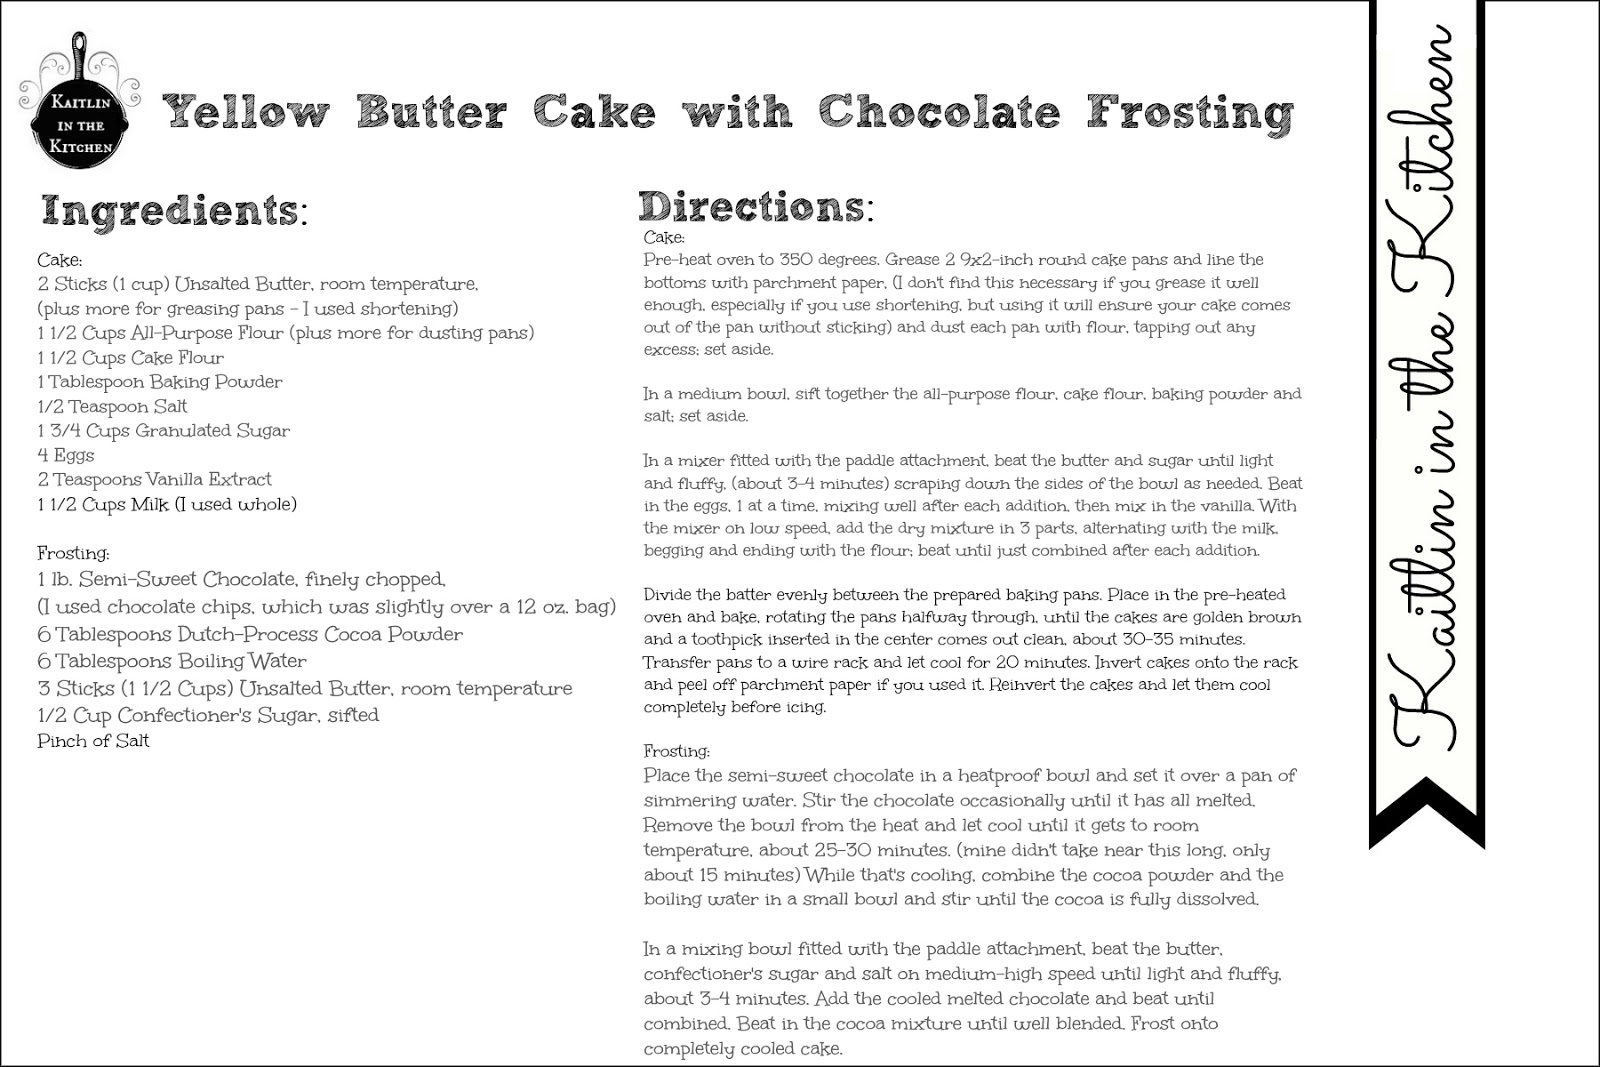 Kaitlin in the Kitchen: Yellow Butter Cake with Chocolate Frosting